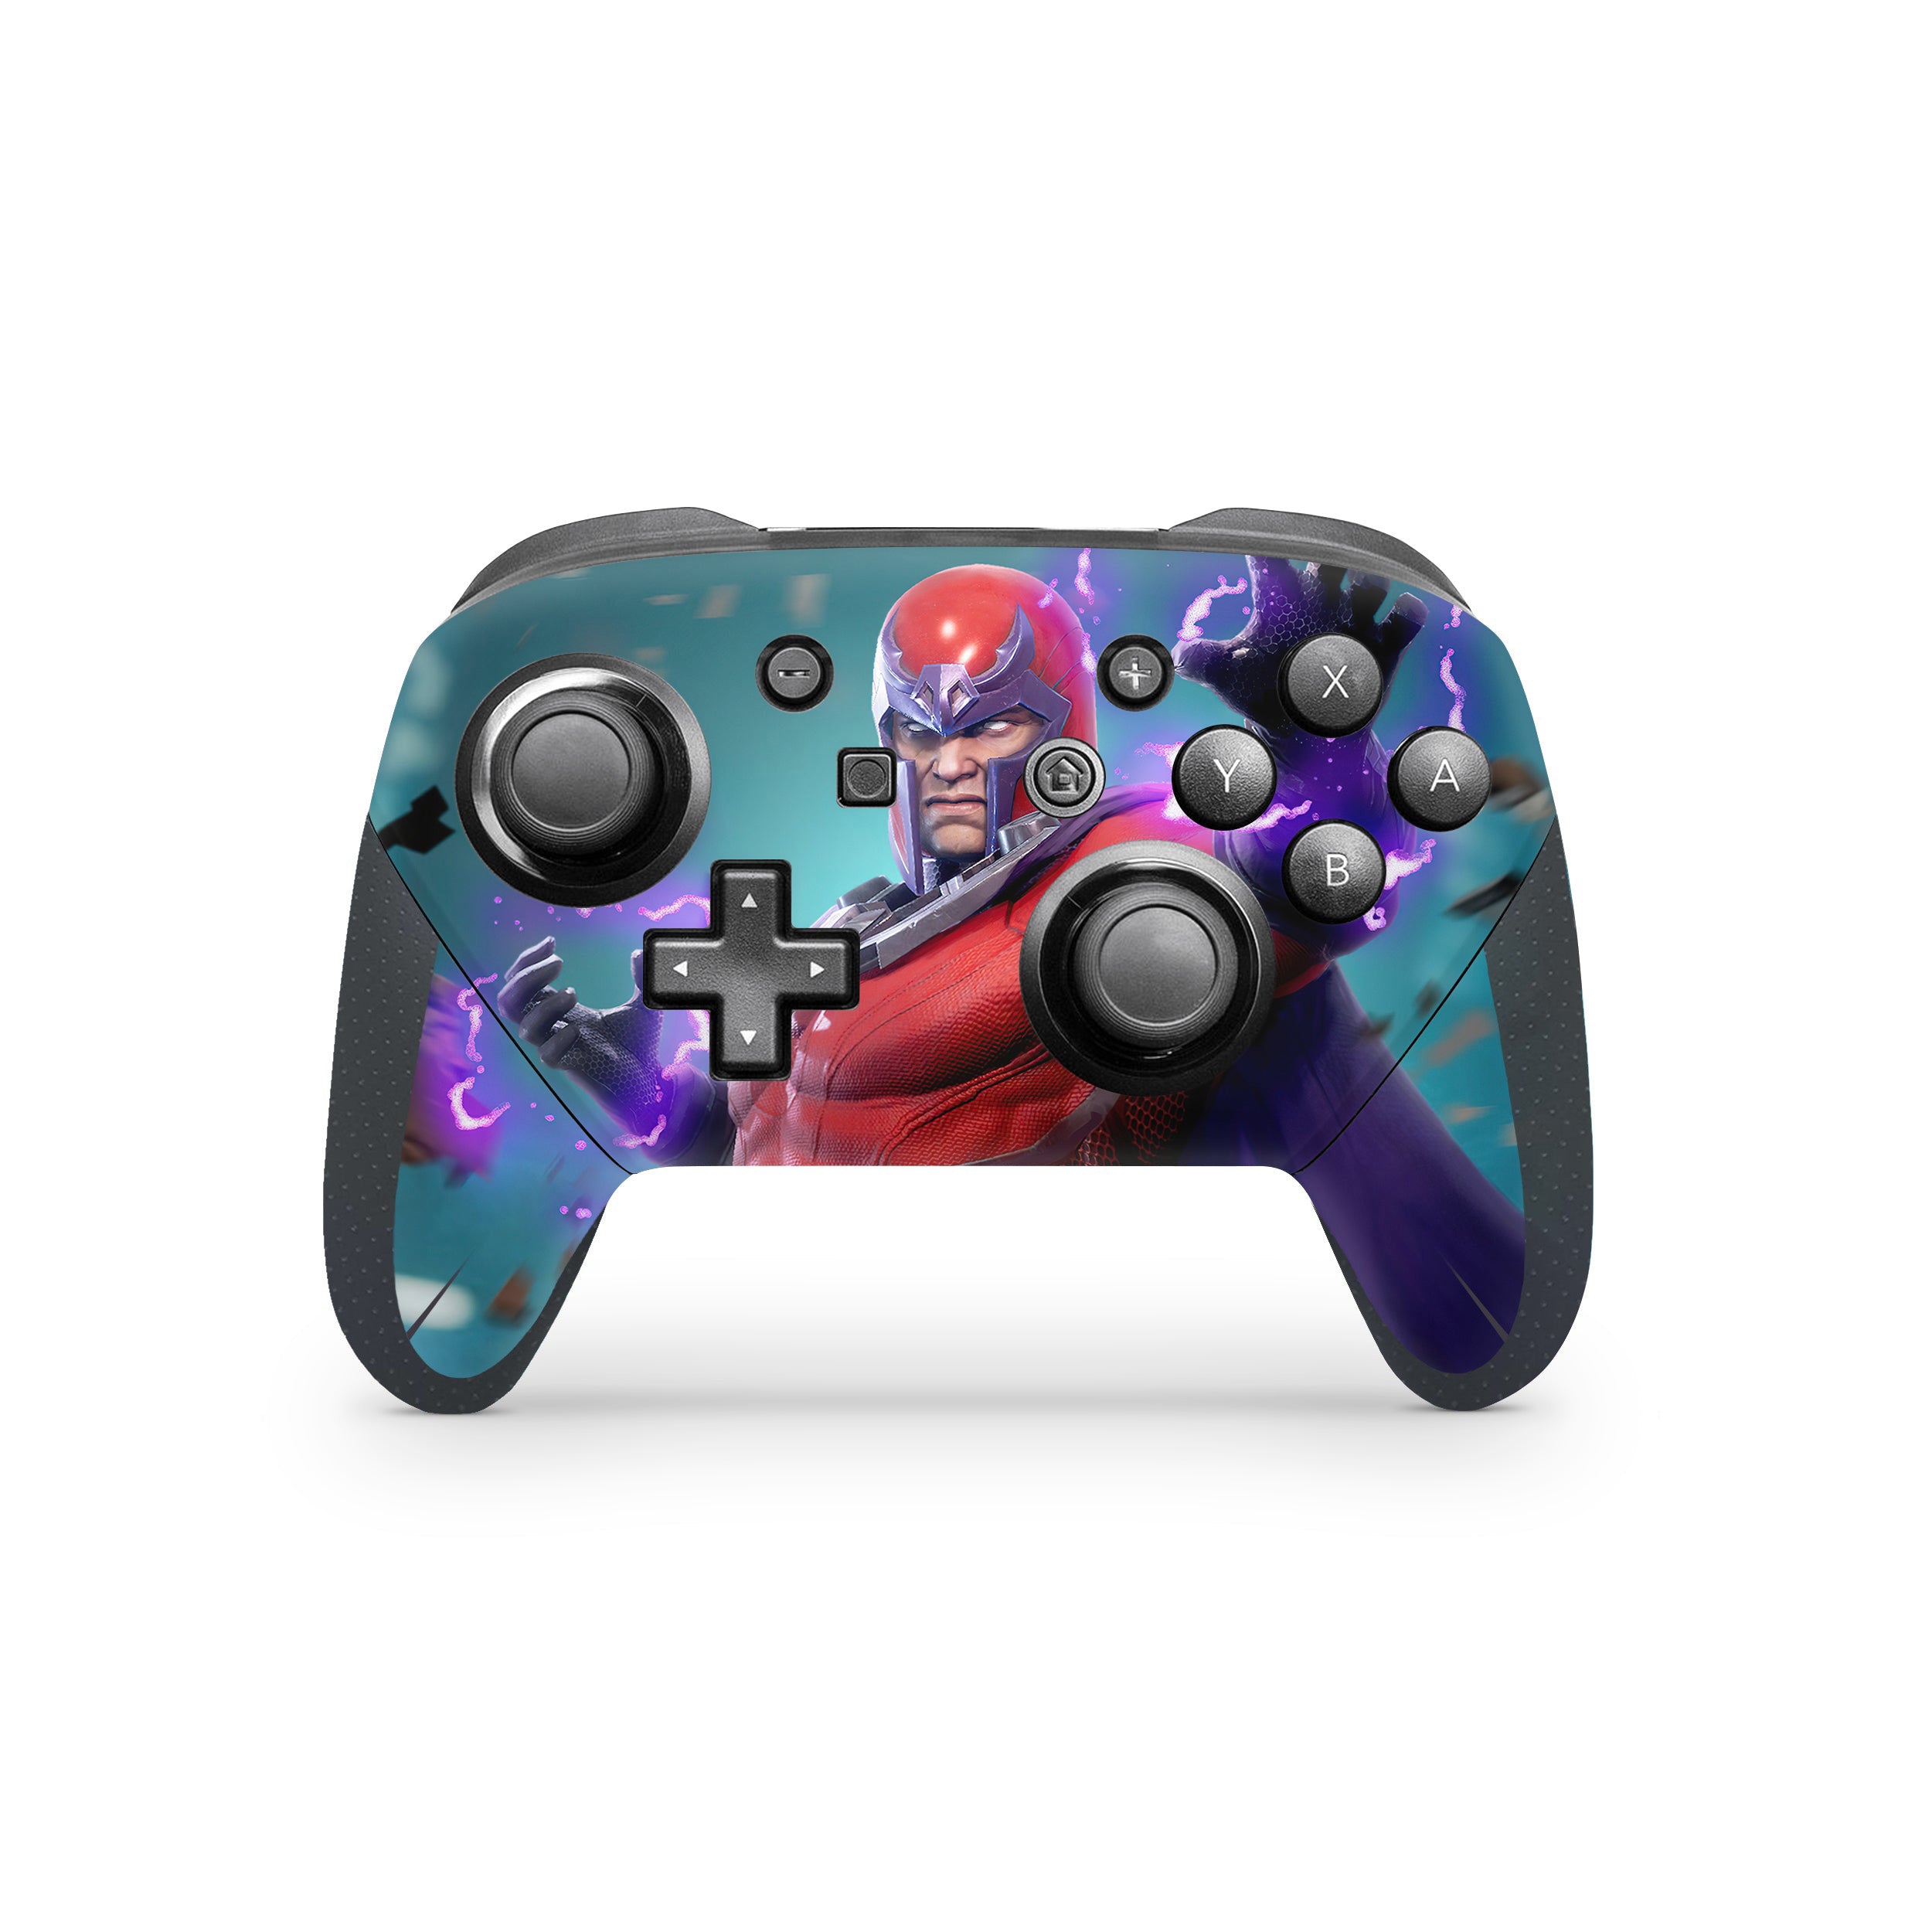 A video game skin featuring a Marvel Comics X Men Magneto design for the Switch Pro Controller.